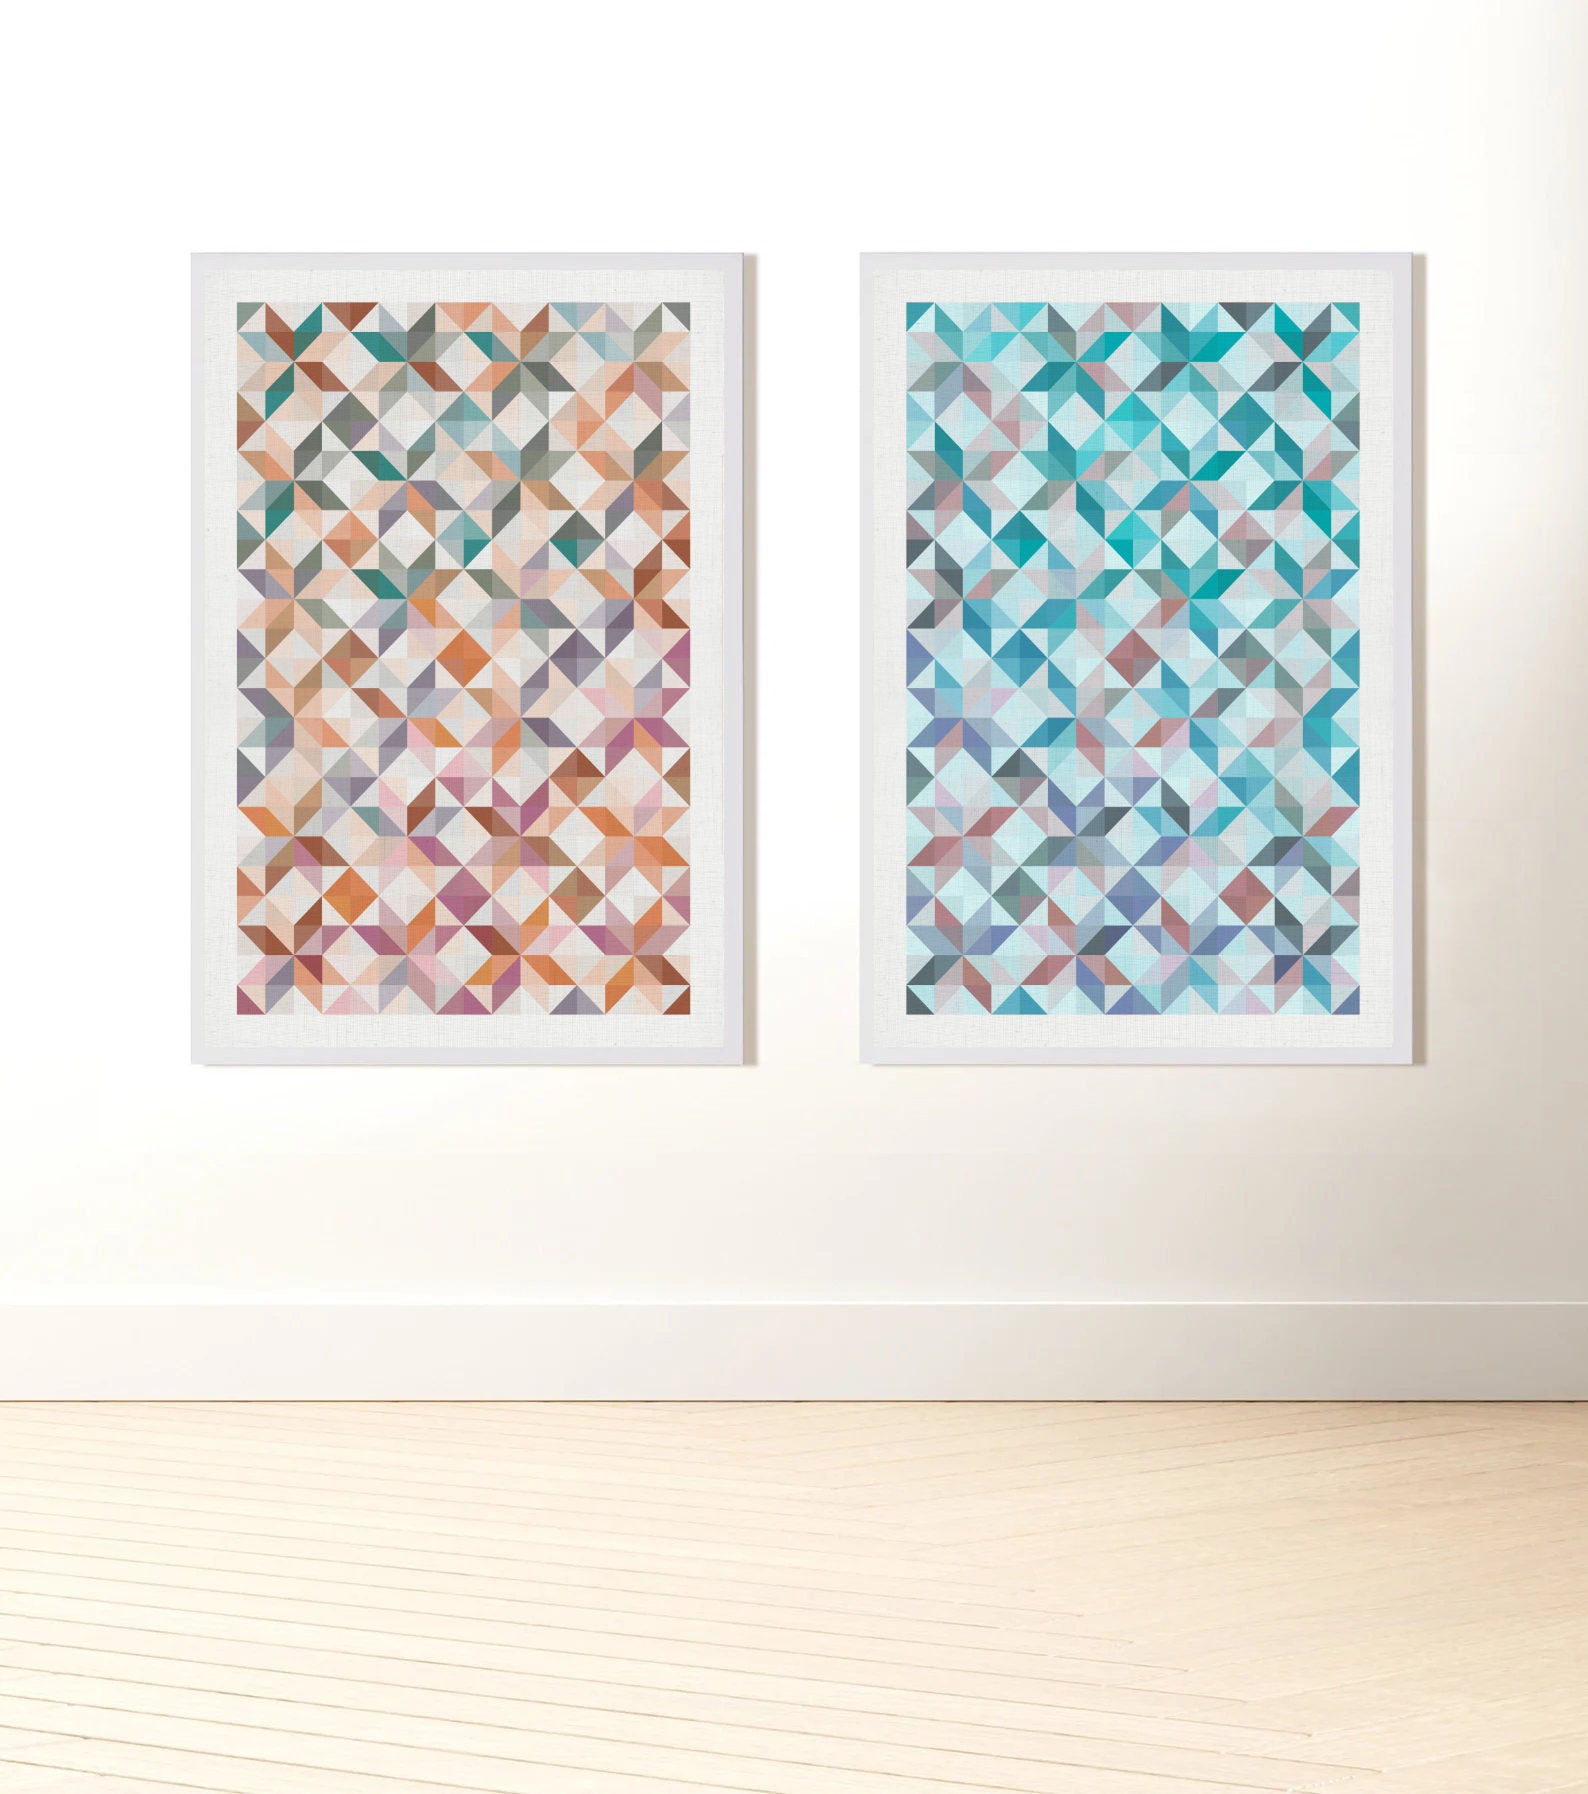 Two prints of  traditional patchwork patterns one mostly orange and one blue based, hanging on a wall